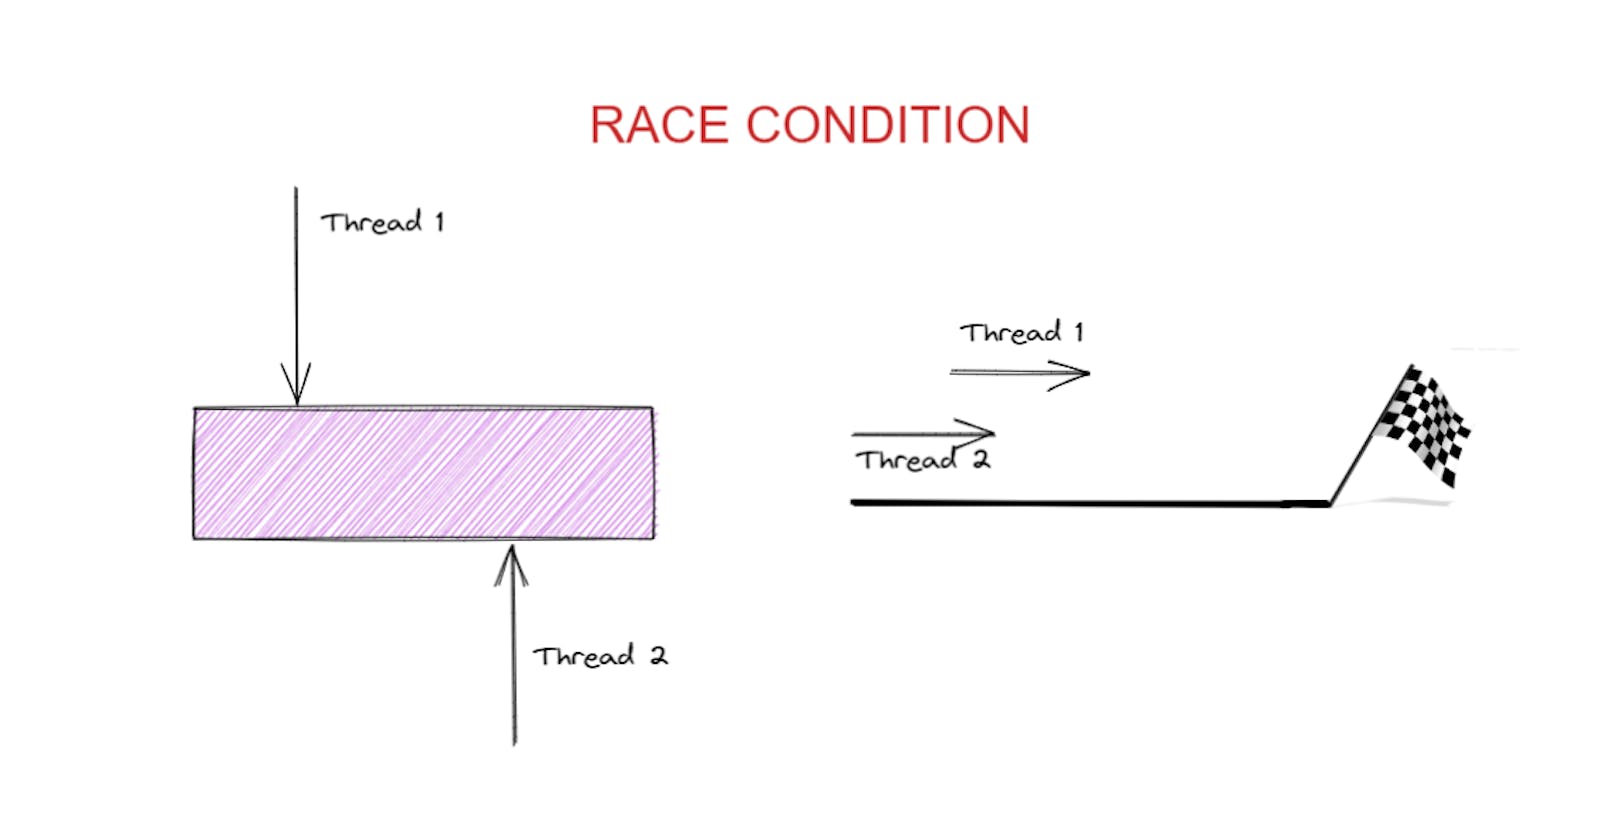 Race Condition in Operating Systems